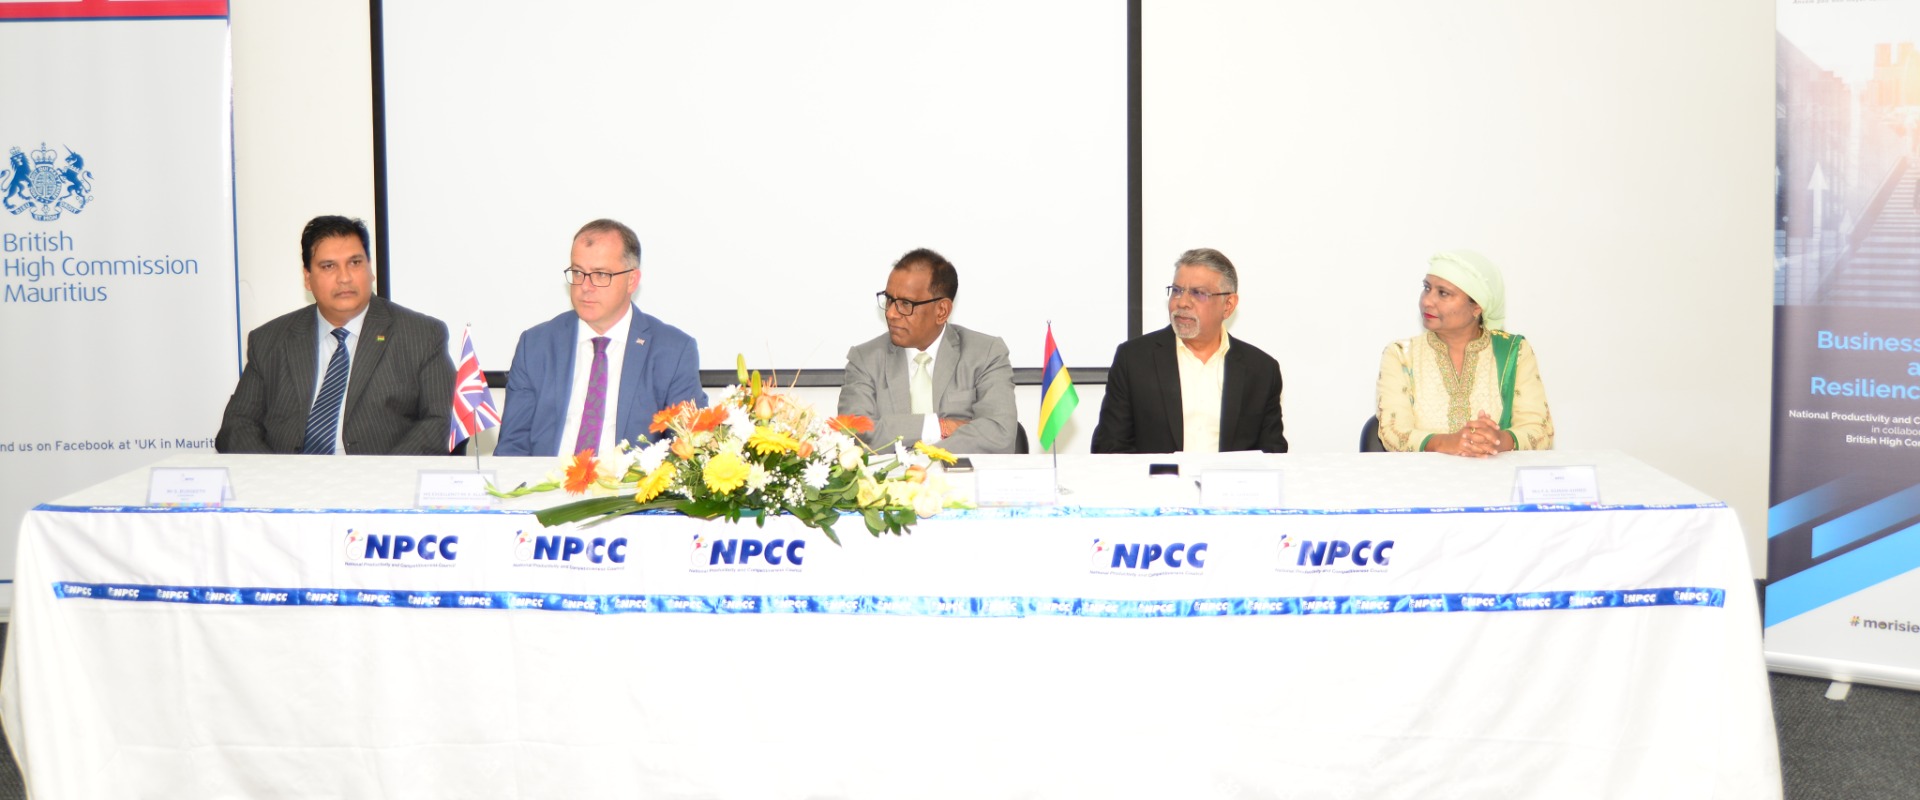 NPCC launches Business Continuity and Resilience Planning programme for local companies